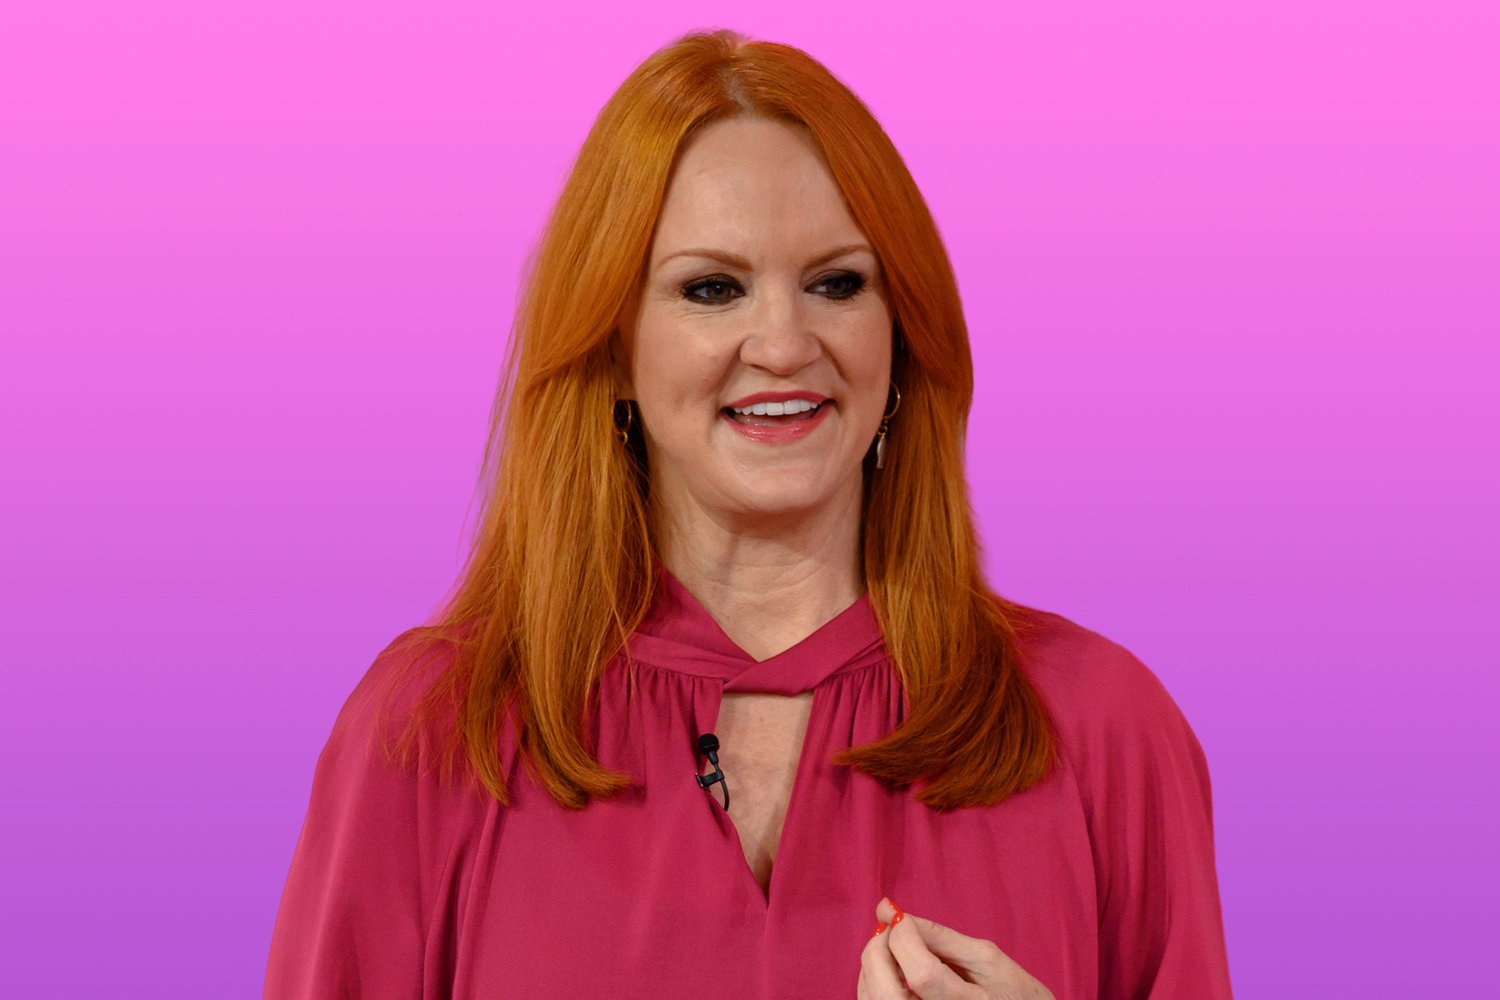 Ree Drummond with red hair, smiling during an interview, and wearing a magenta top